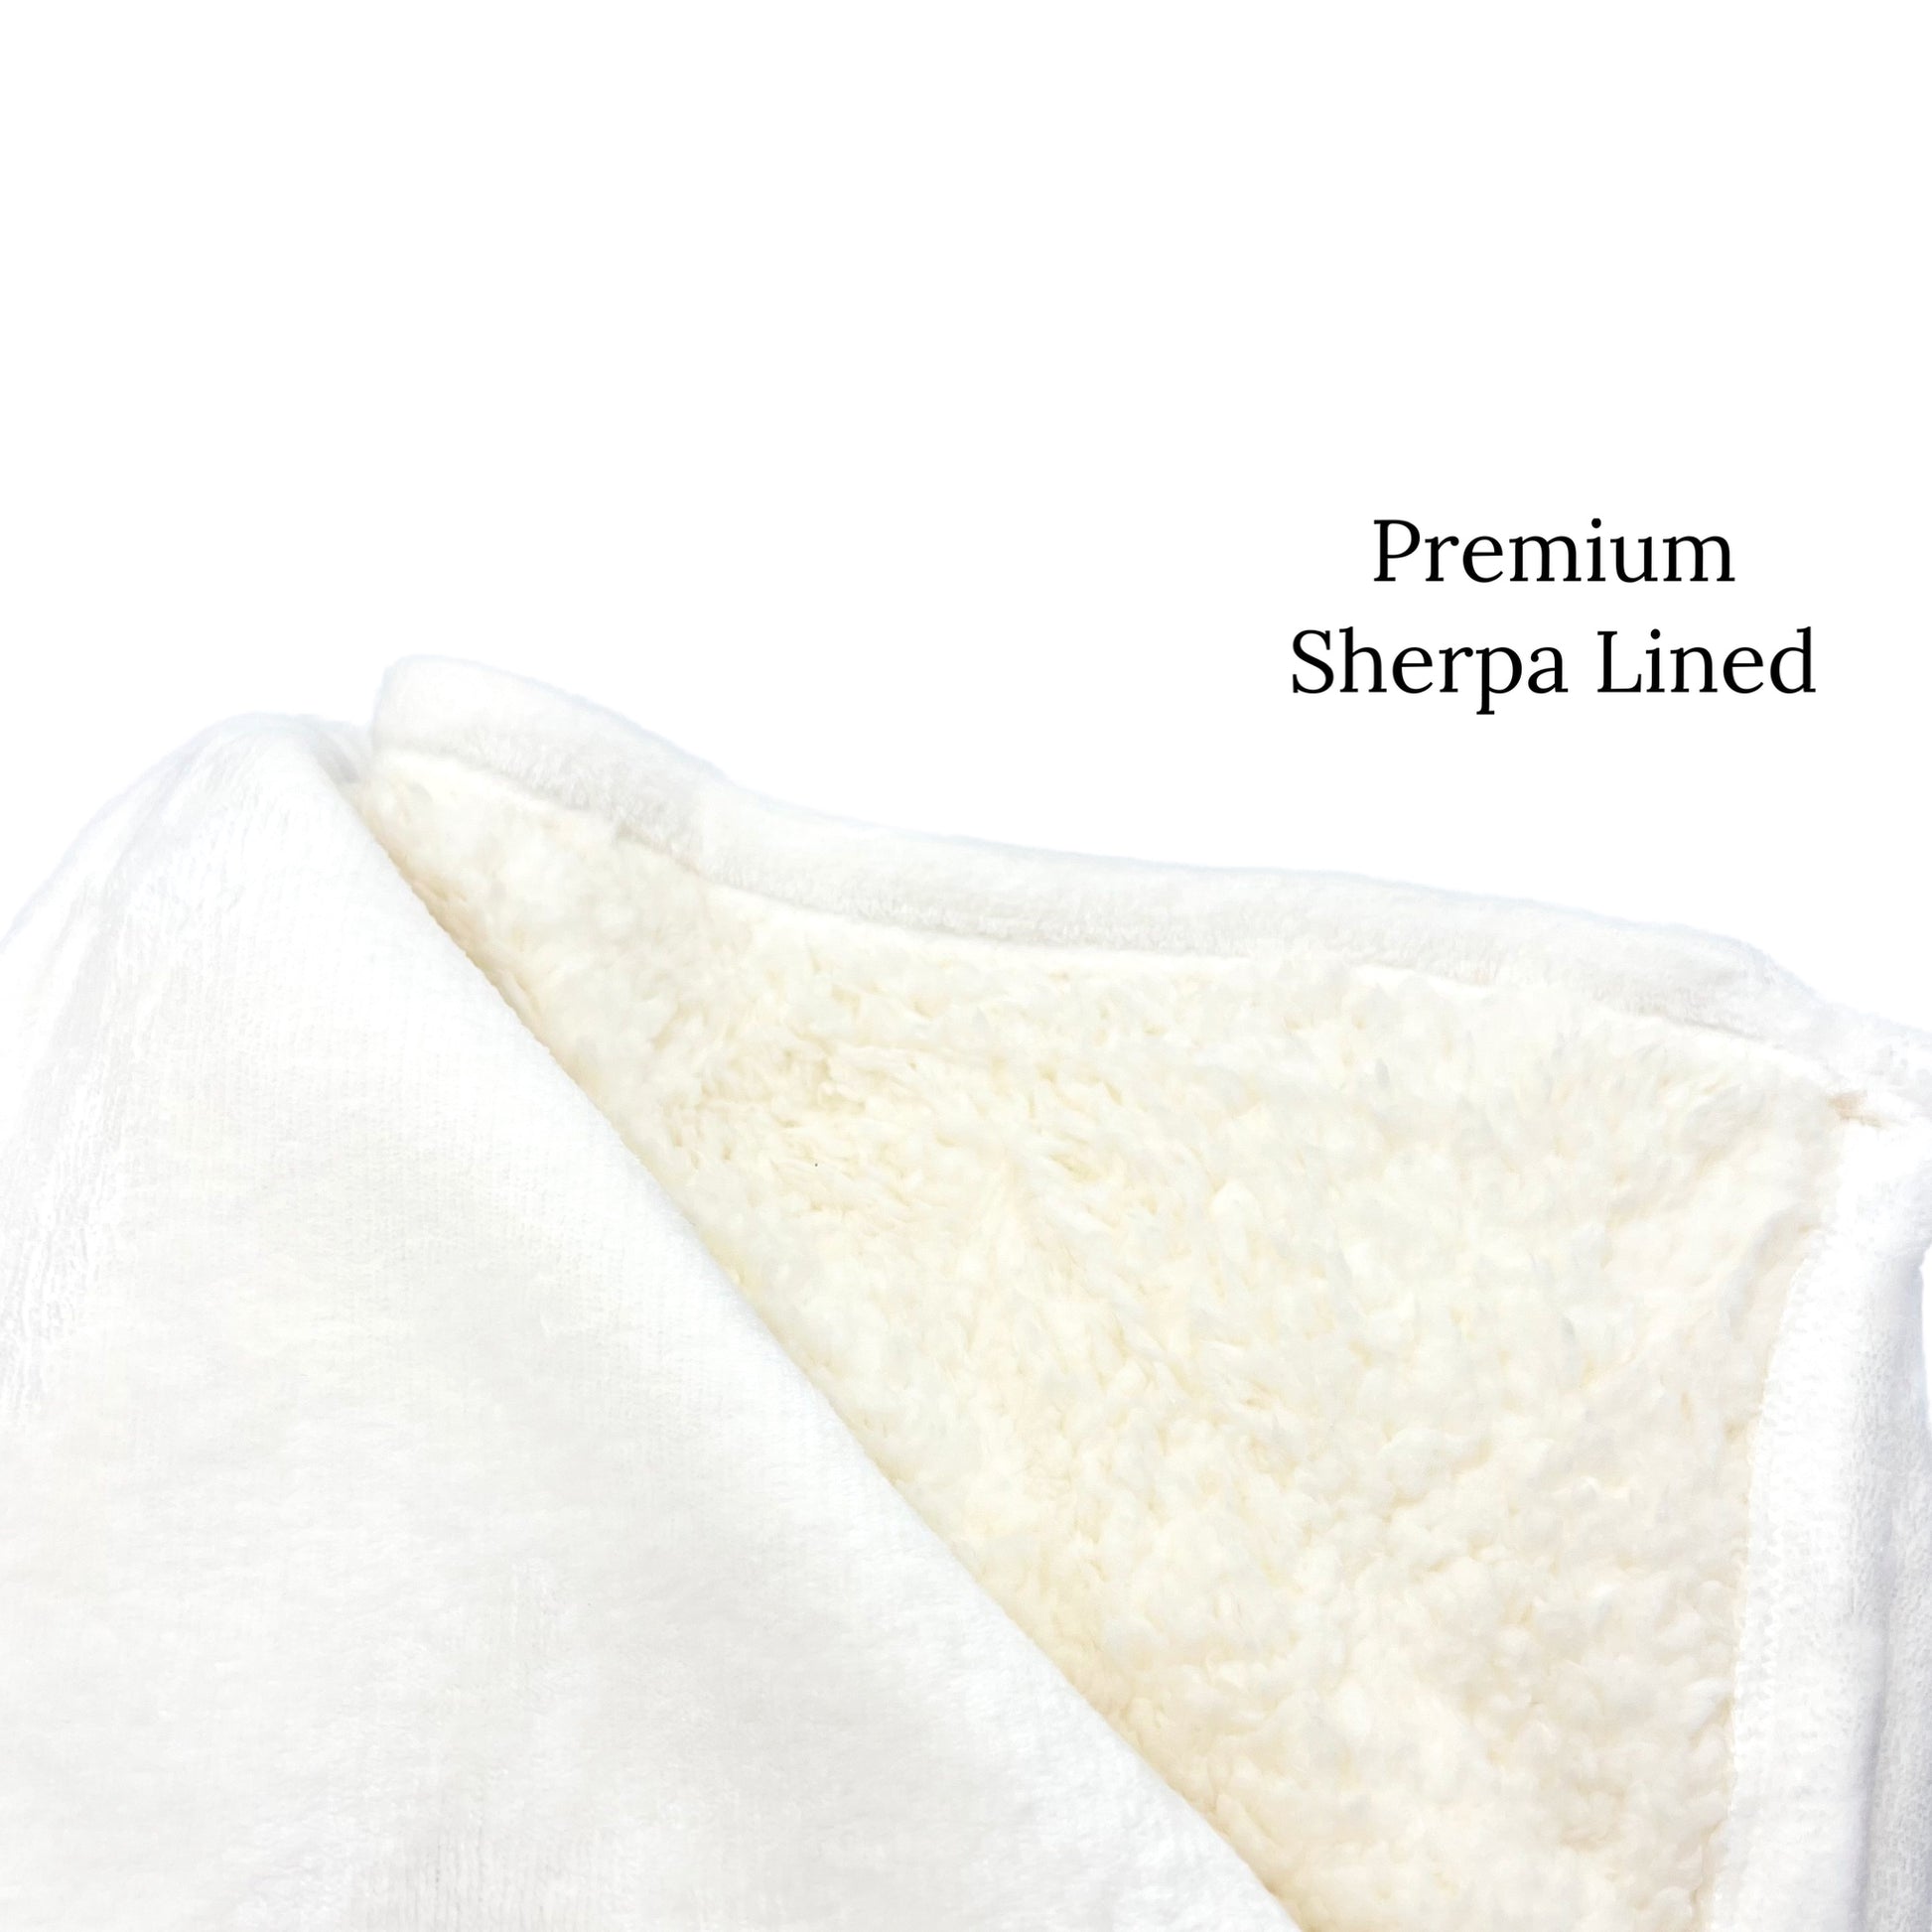 Folded thick fuzzy blanket with inner bottom lining of tick Sherpa furr in base white color.